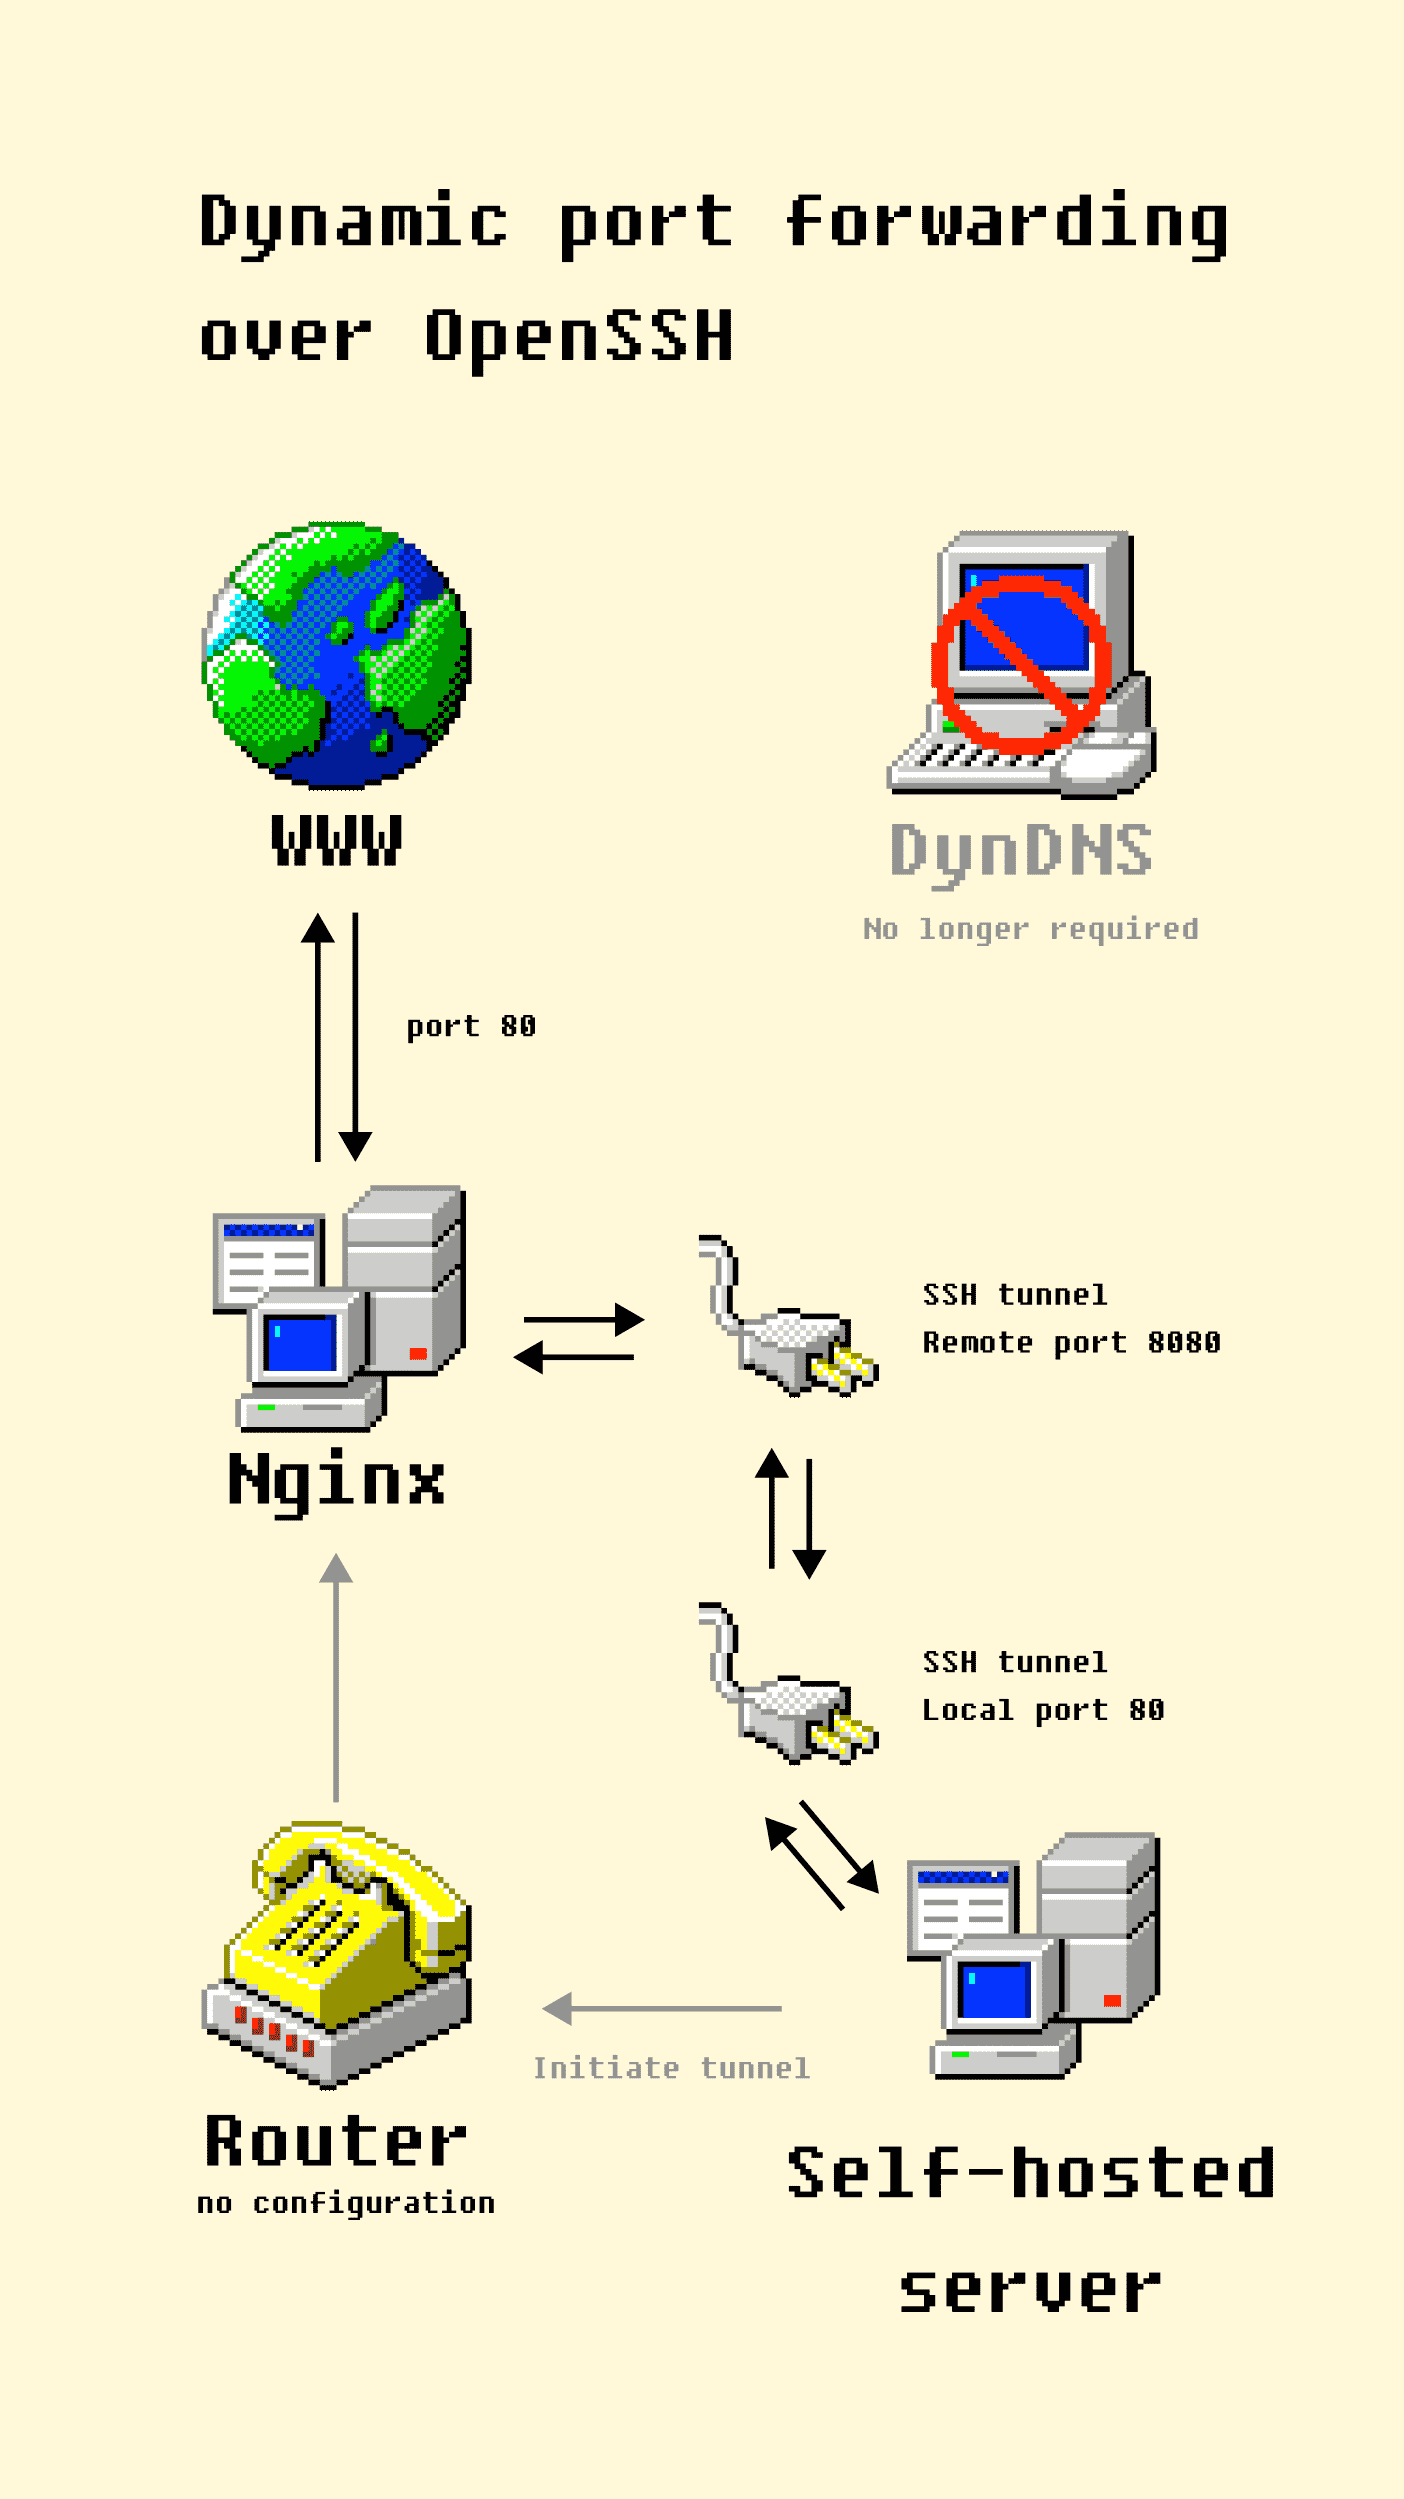 A self-hosted server creates a ssh tunnel to the remote server and routes traffic that way, without DynDNS or router configuration.